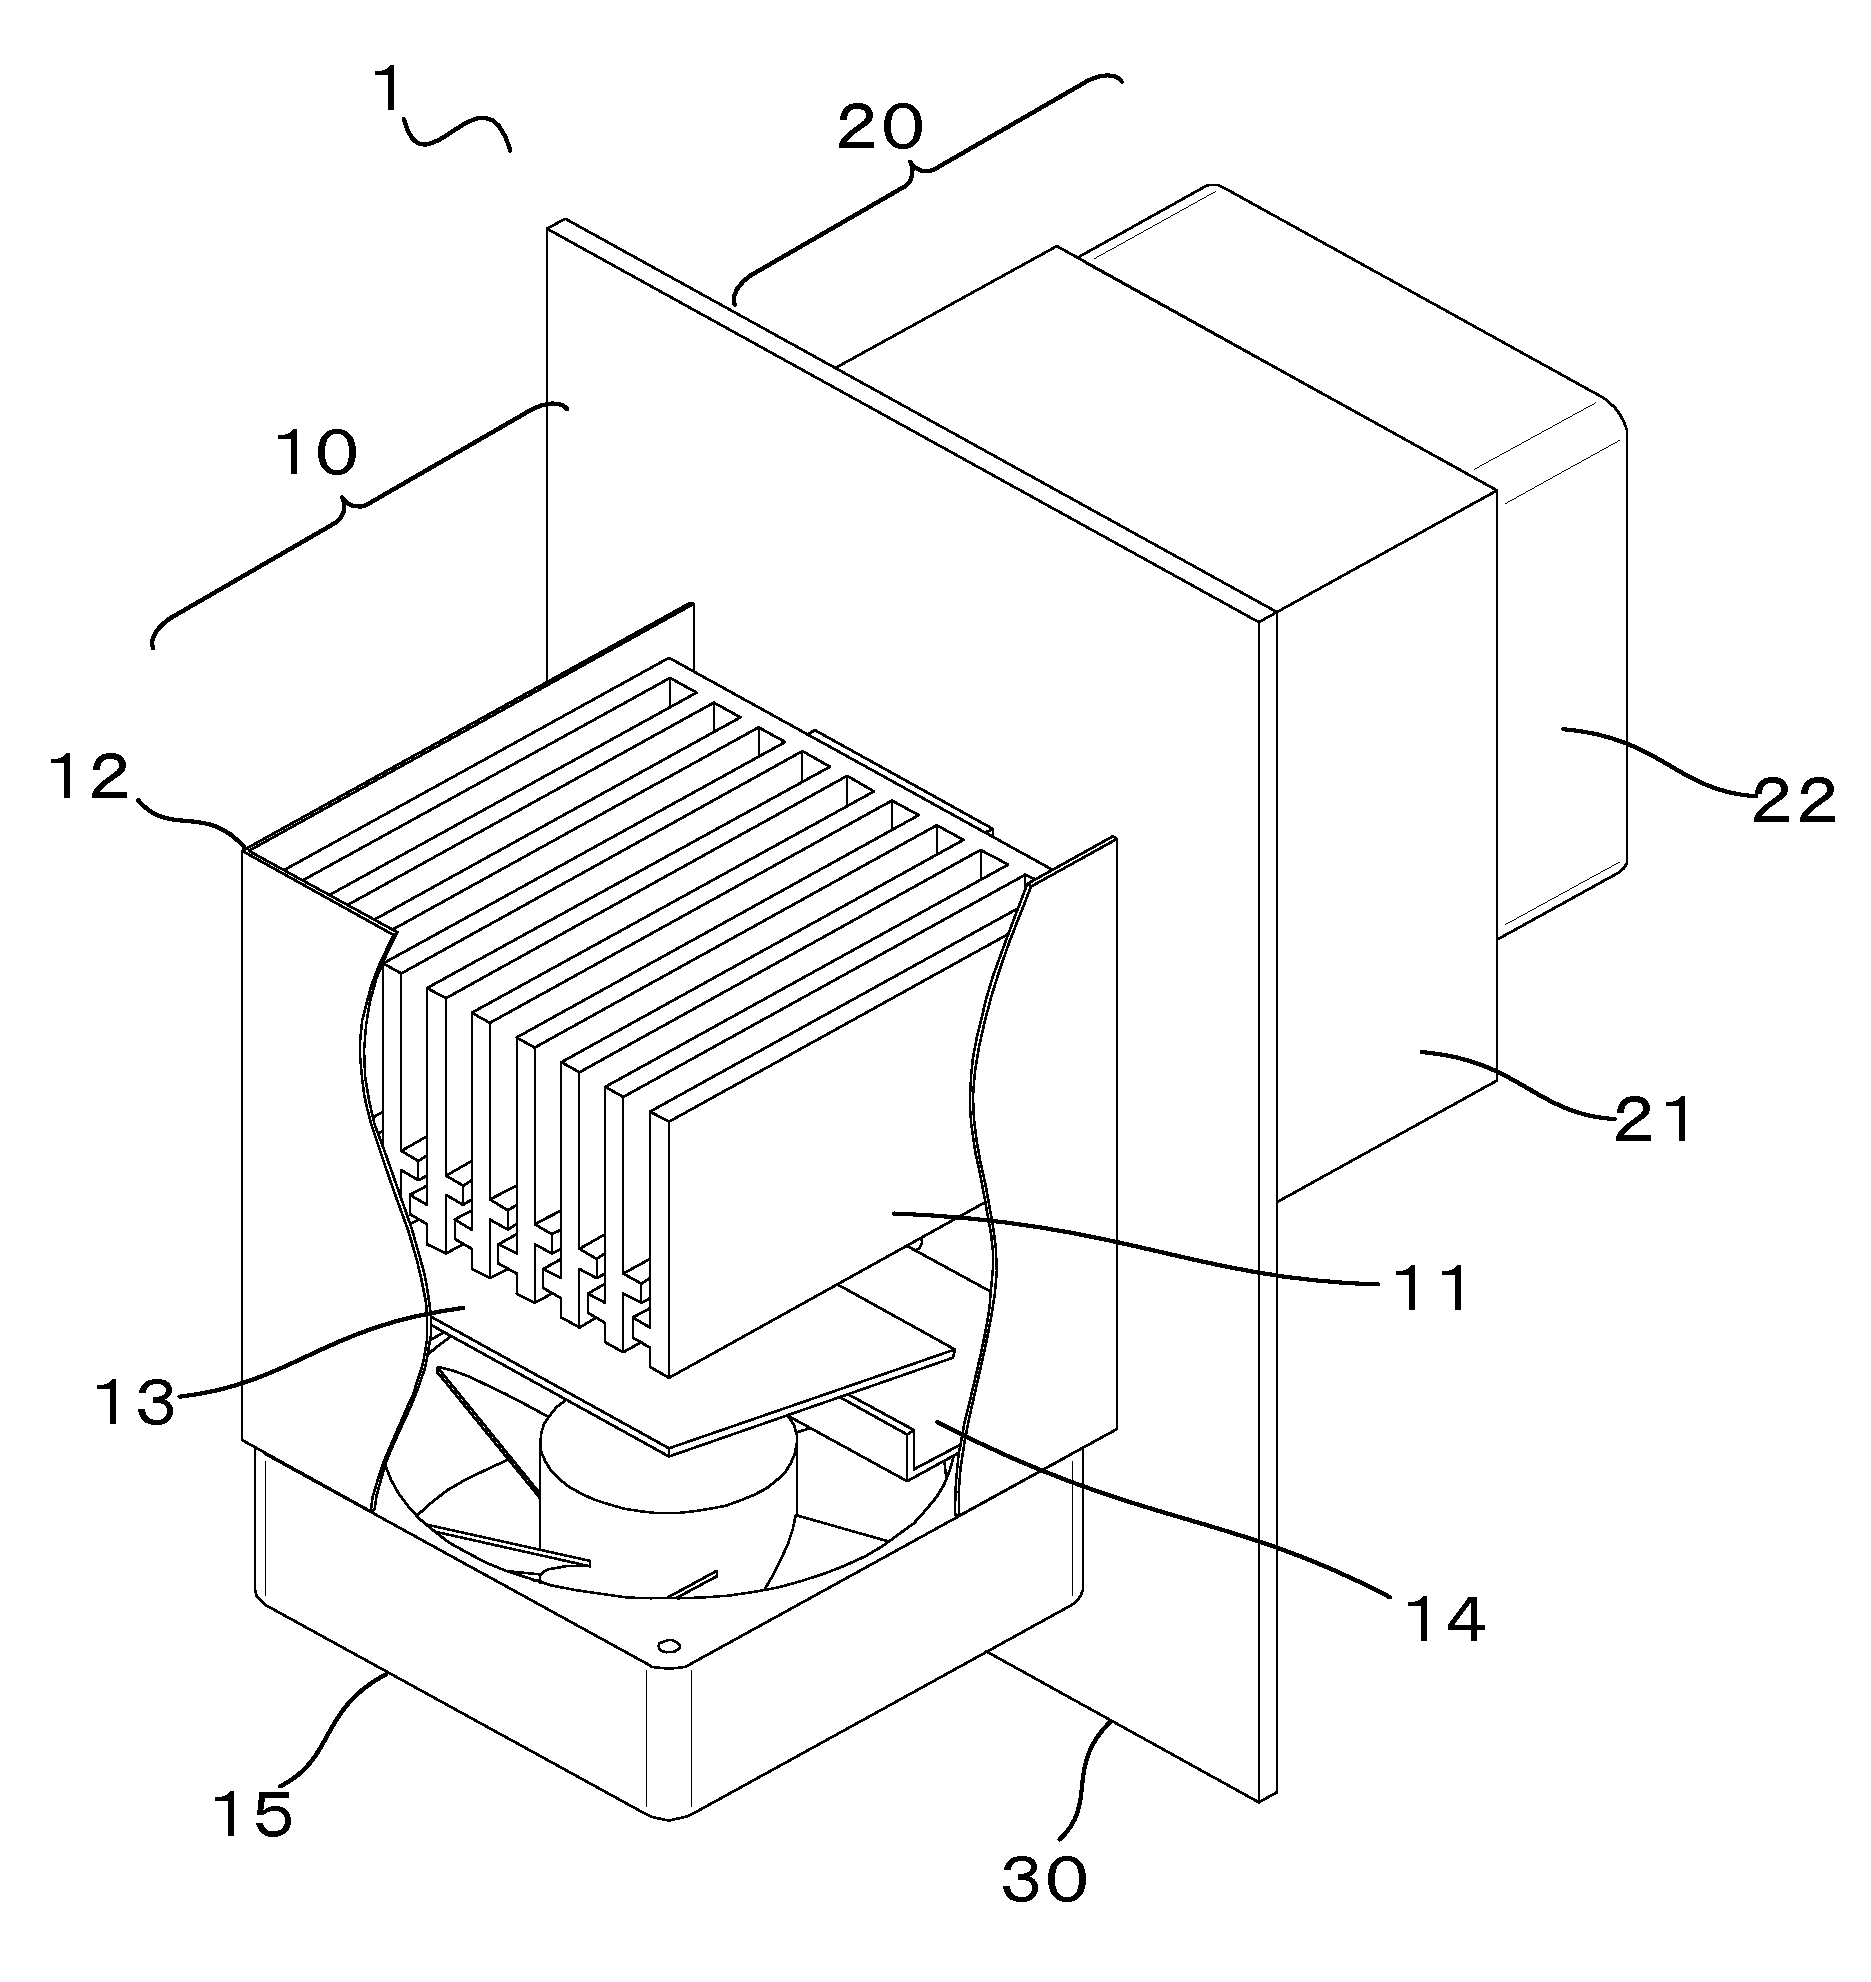 Control panel cooling device for machine tool